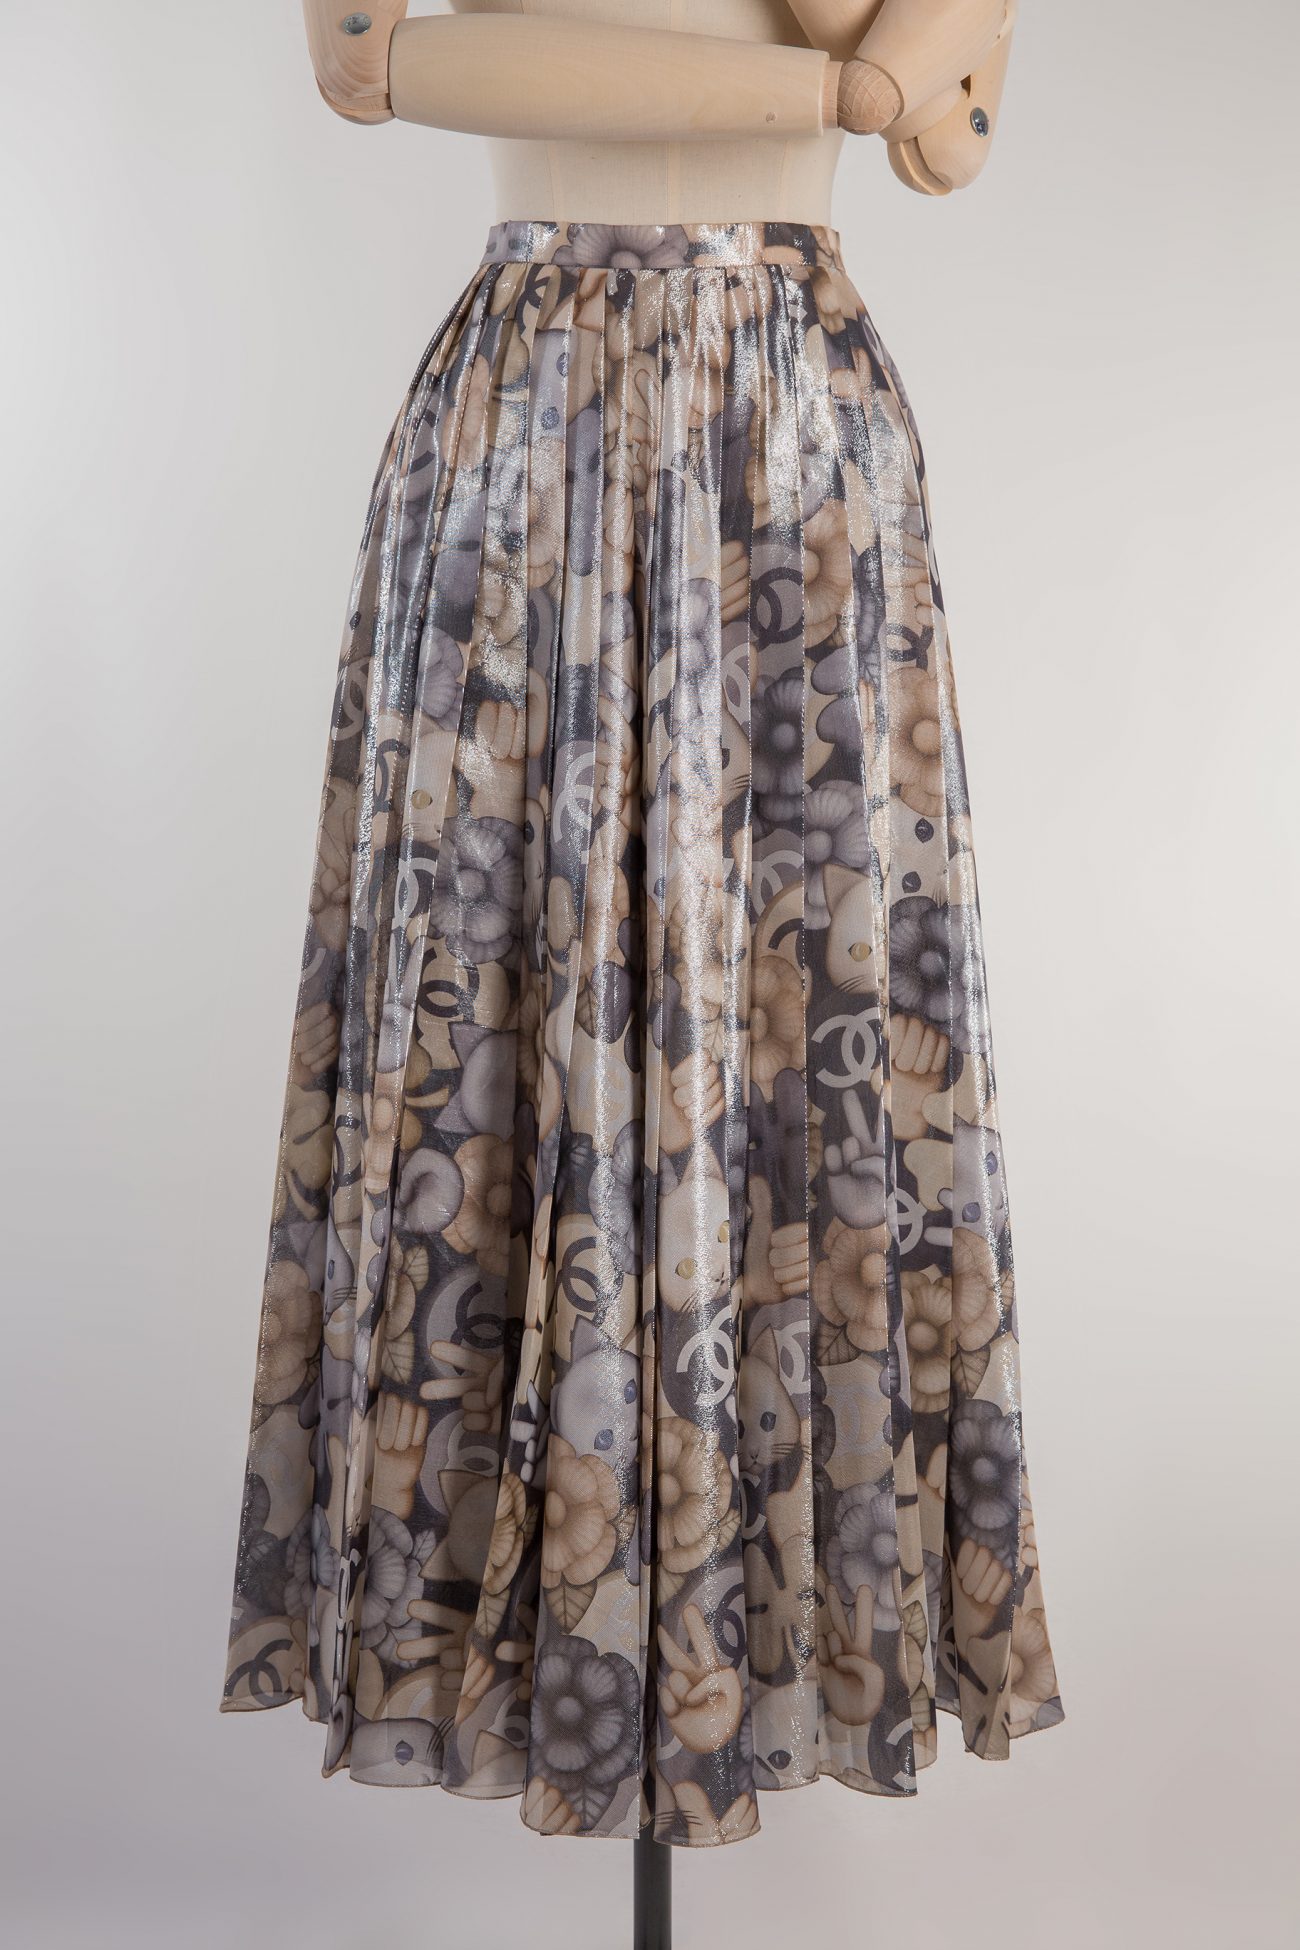 Chanel Skirt, FR36 - Huntessa Luxury Online Consignment Boutique